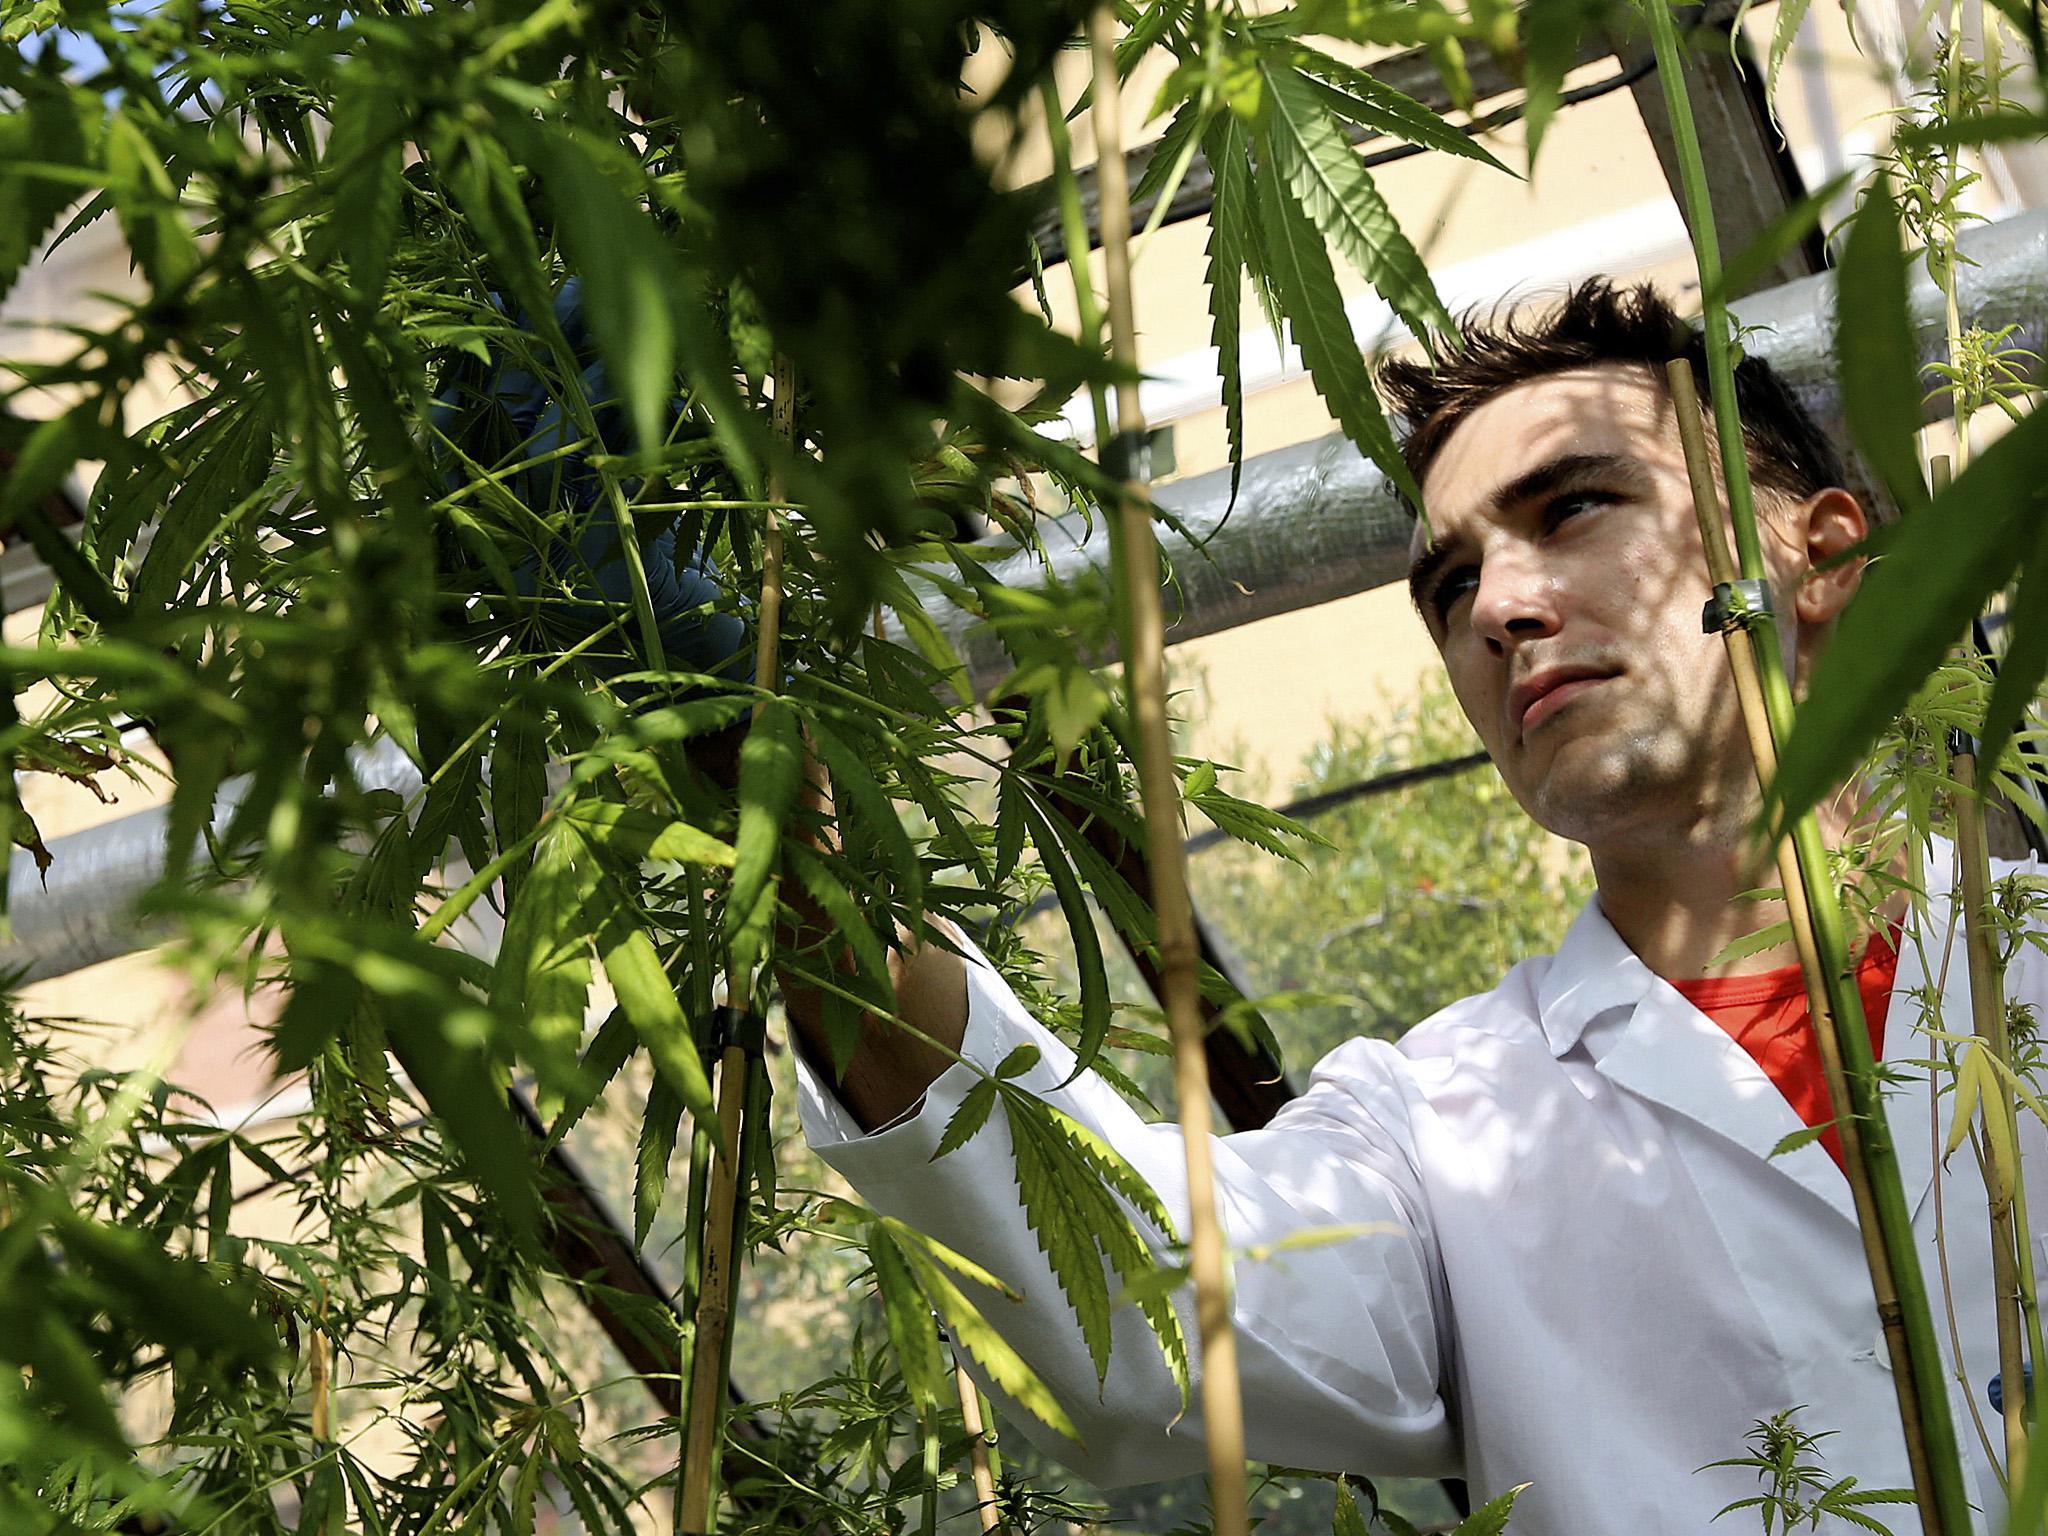 The Italian army has been entrusted with growing large amounts of cannabis for medical patients